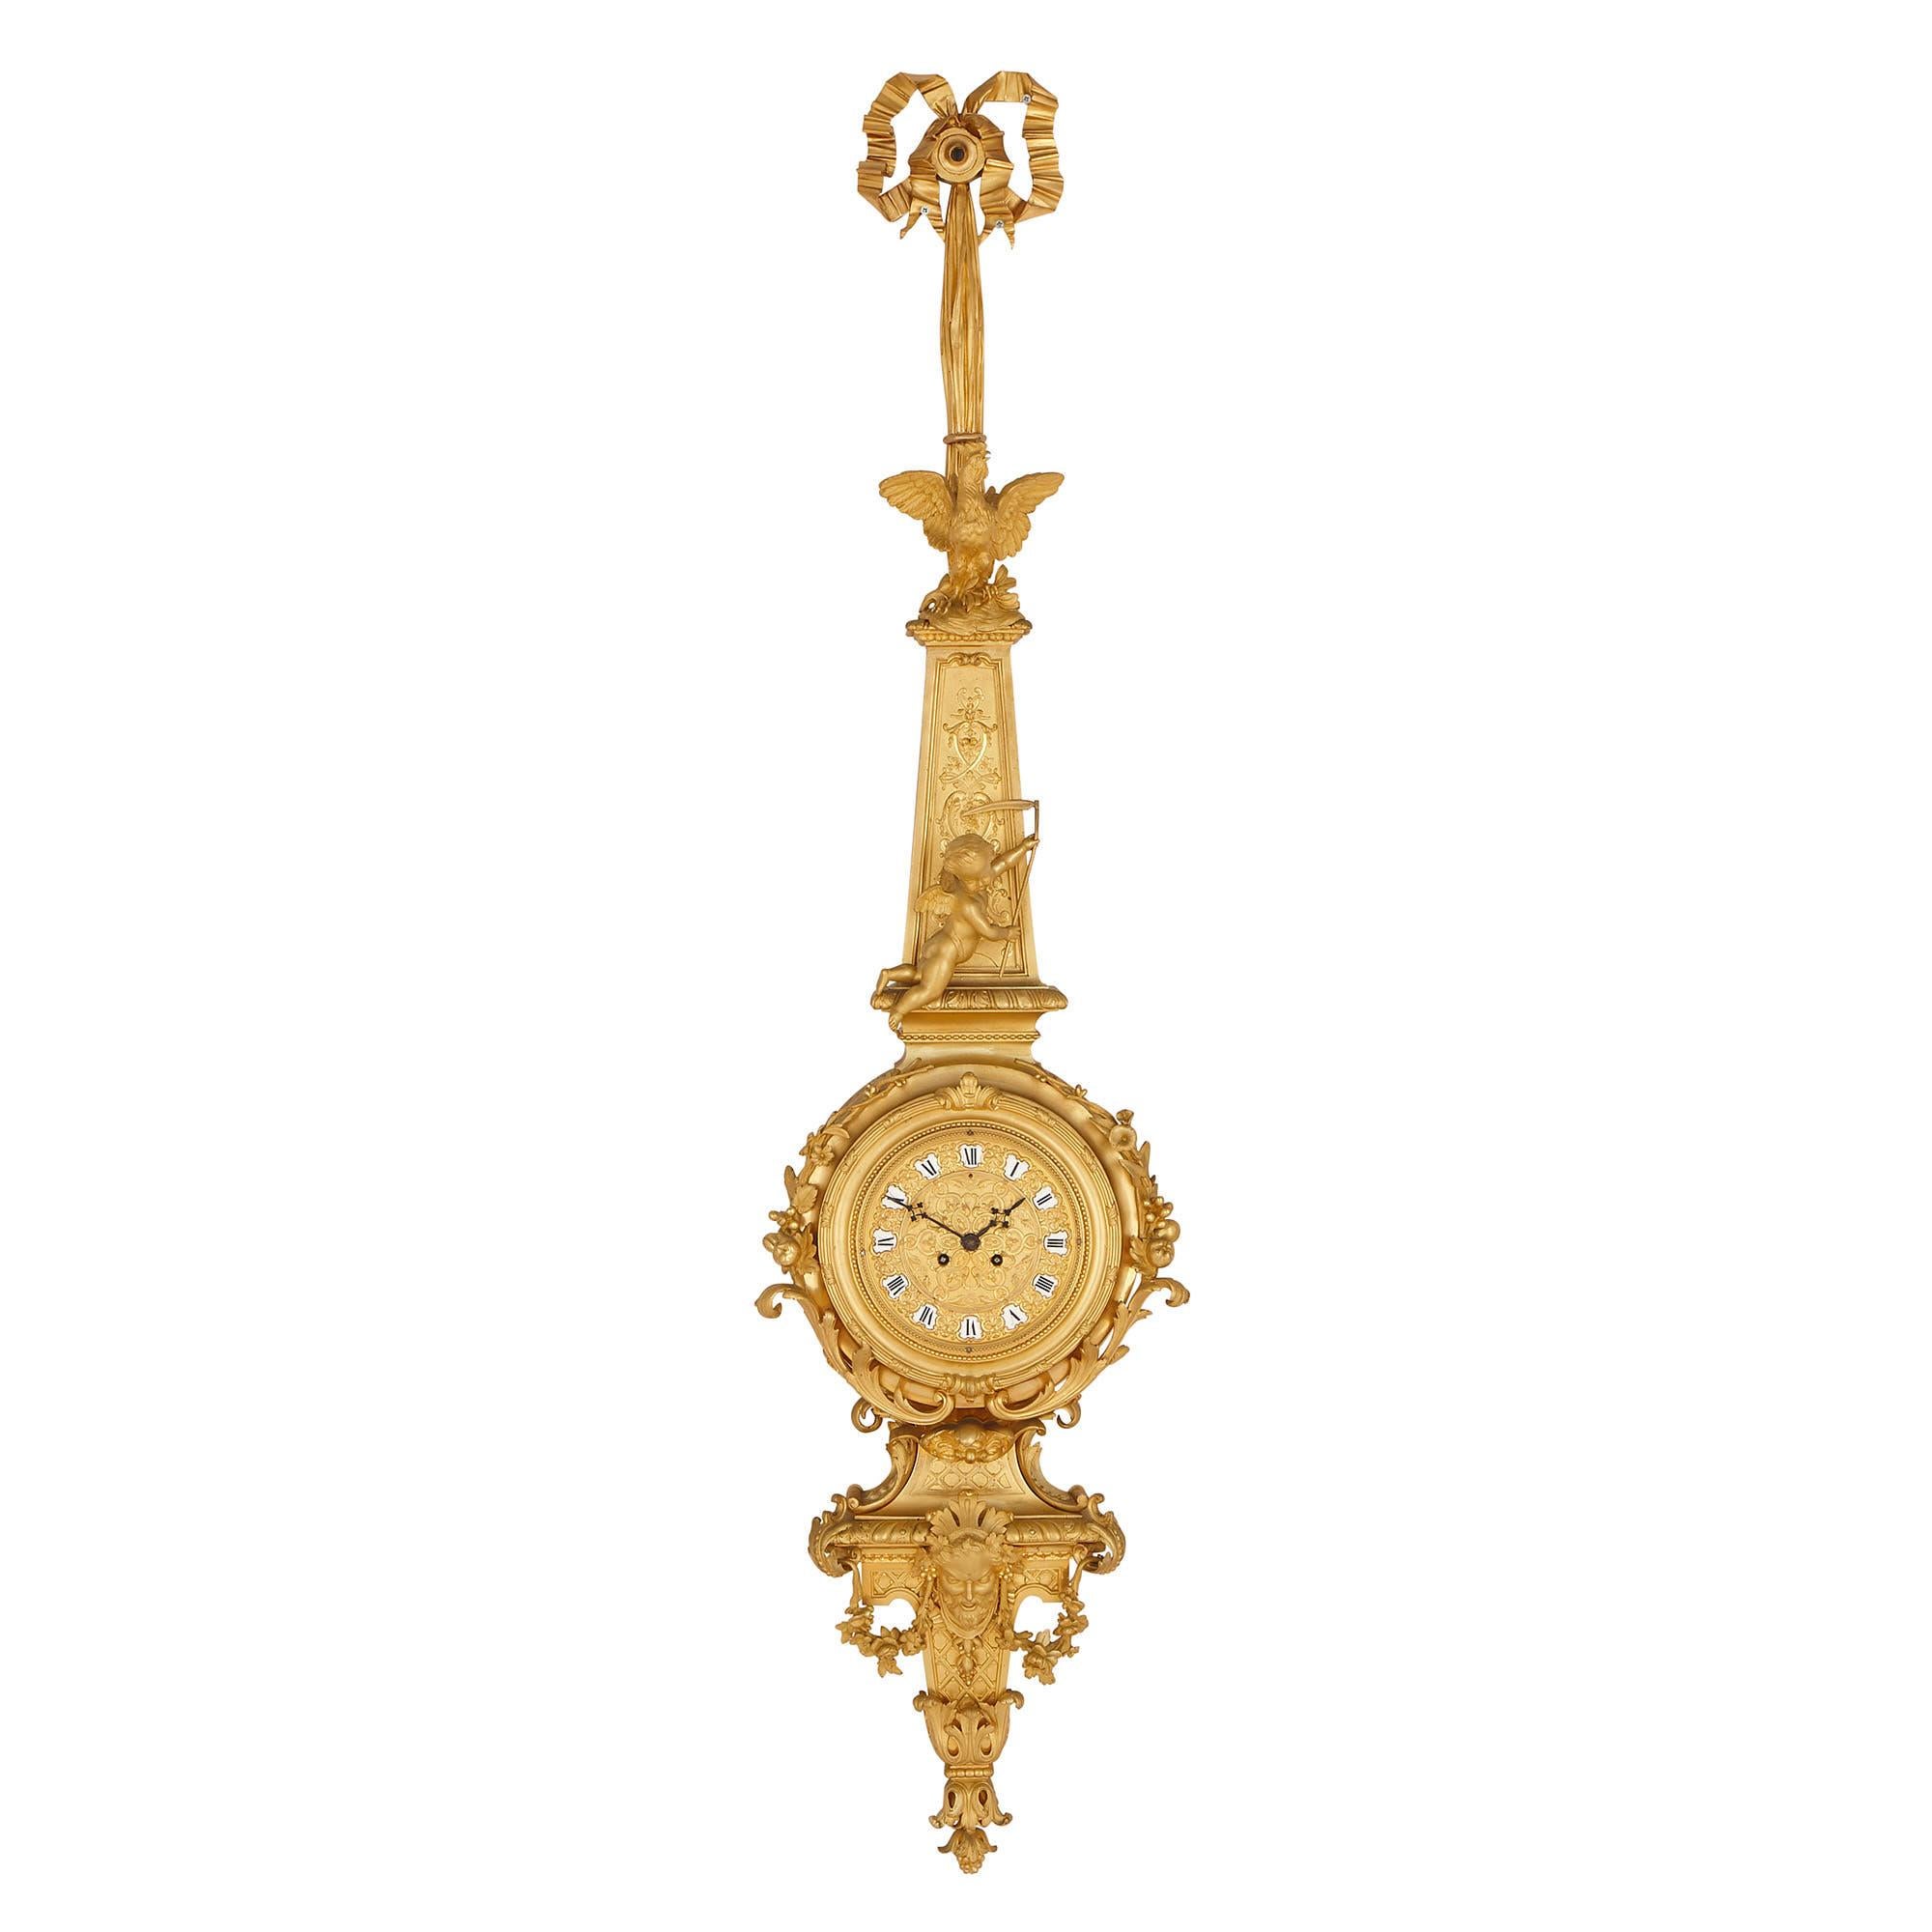 This stunning gilt bronze clock and barometer pair was created in circa 1860 in France. The two have been attributed to Raingo Frères, the prestigious, 19th century clockmaking firm. 

Founded by the Belgian-born Zacharie Joseph Raingo in 1813,